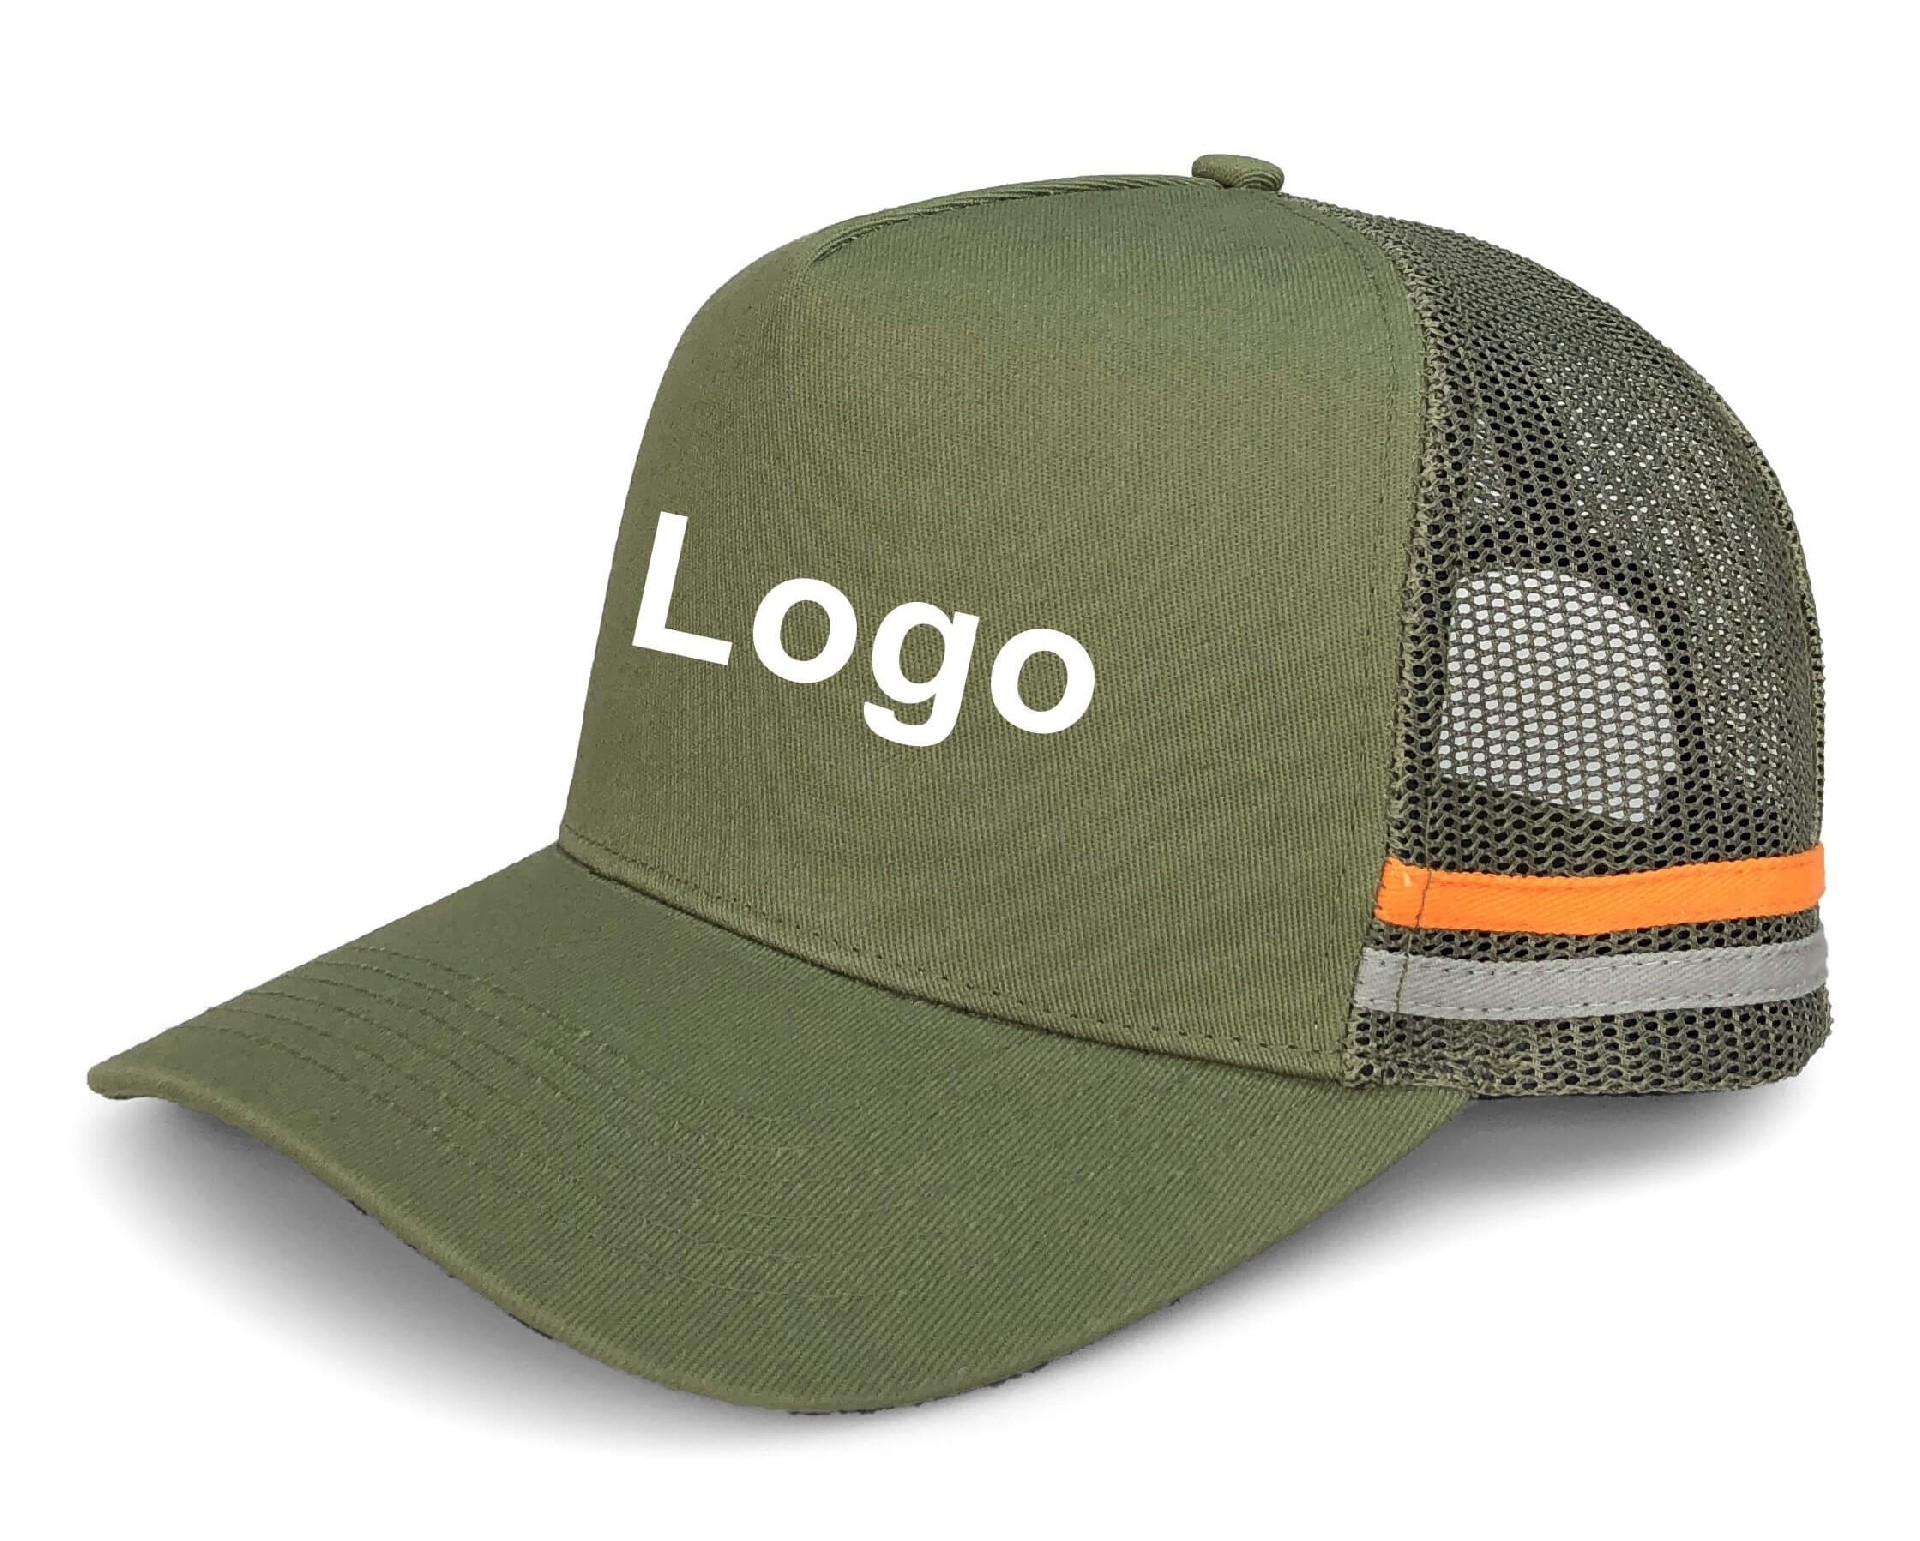 CTC-3018(Hot Selling Australian Country Trucker Caps High Profile 5 Panel 2 Stripes Side Striped Hat Olive Green Trucker Hat)